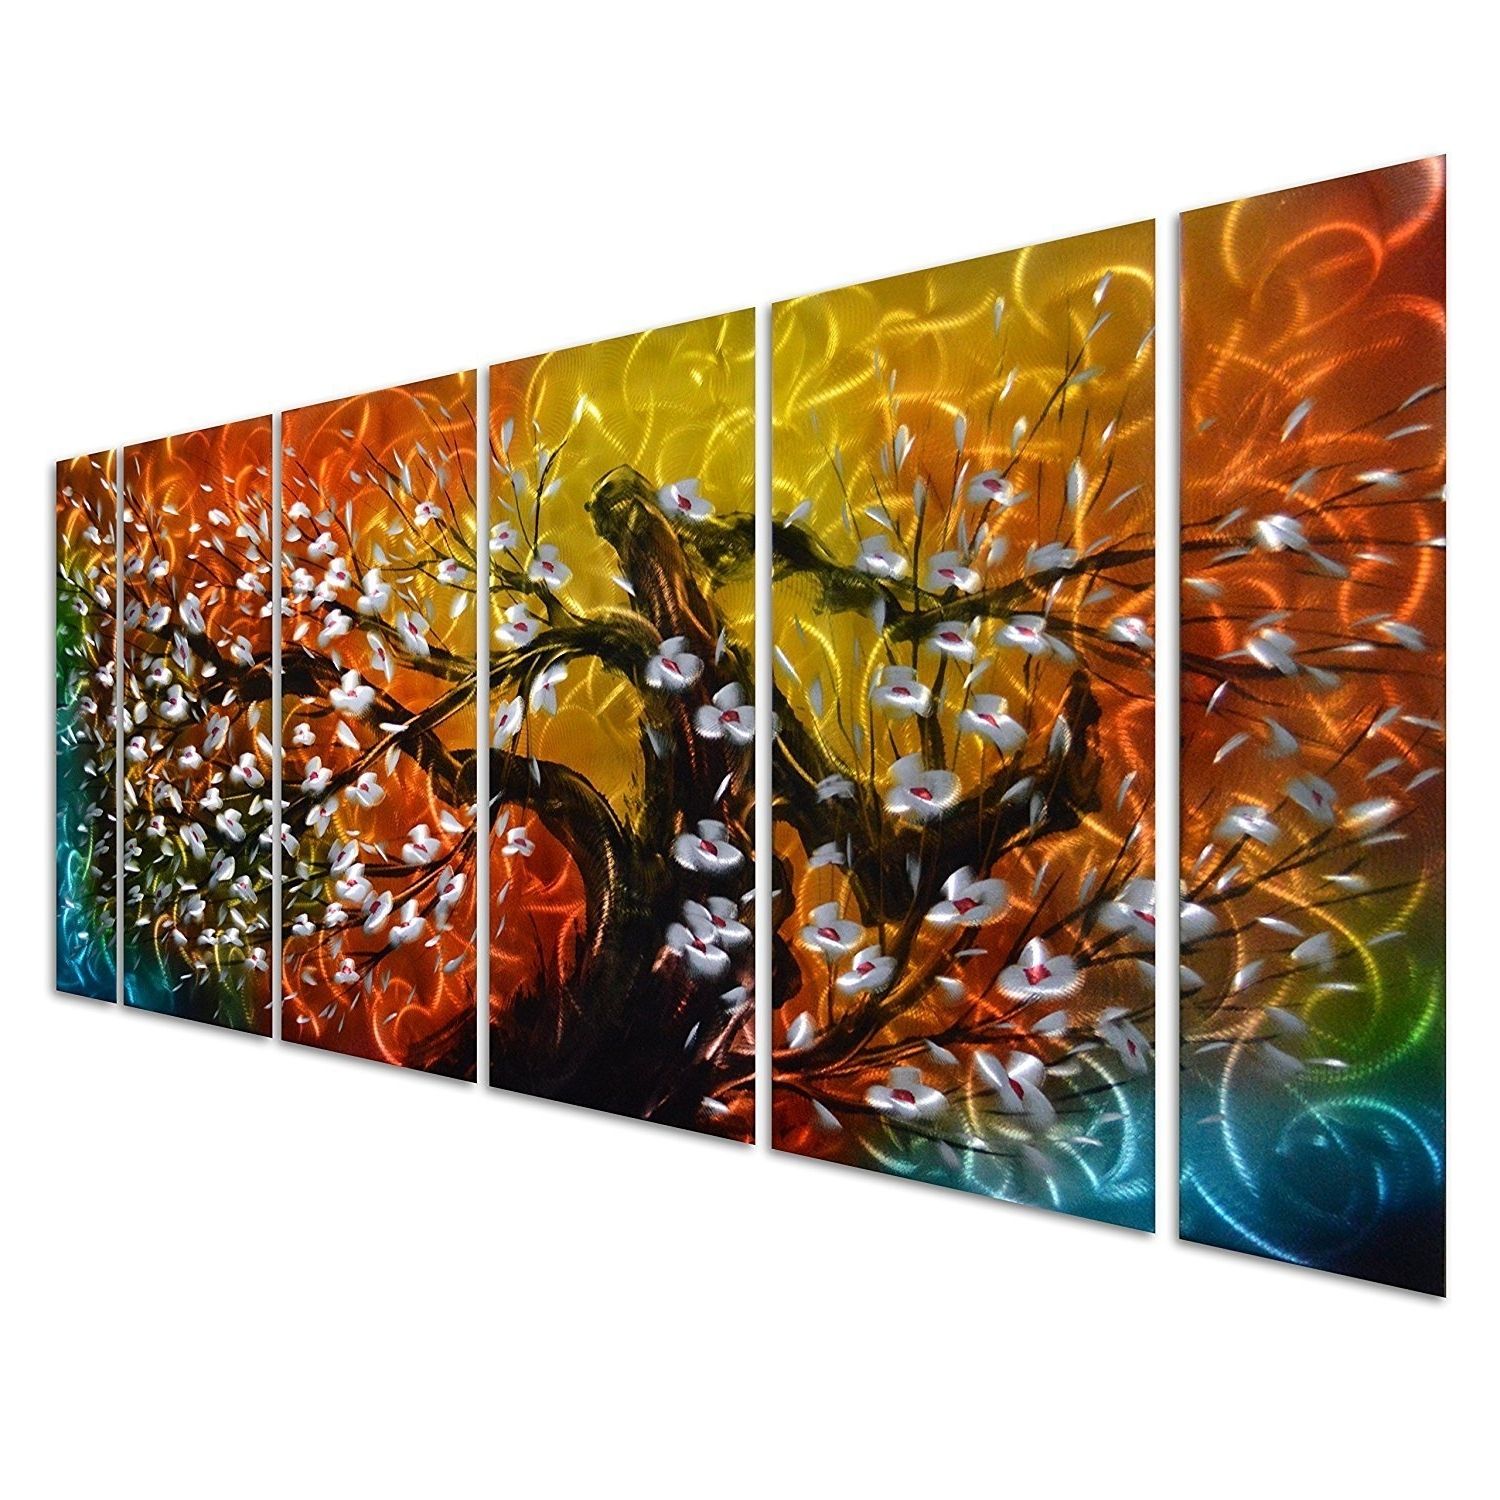 Best And Newest Cheap Wall Art Metal Tree, Find Wall Art Metal Tree Deals On Line Intended For Inexpensive Abstract Metal Wall Art (View 13 of 15)